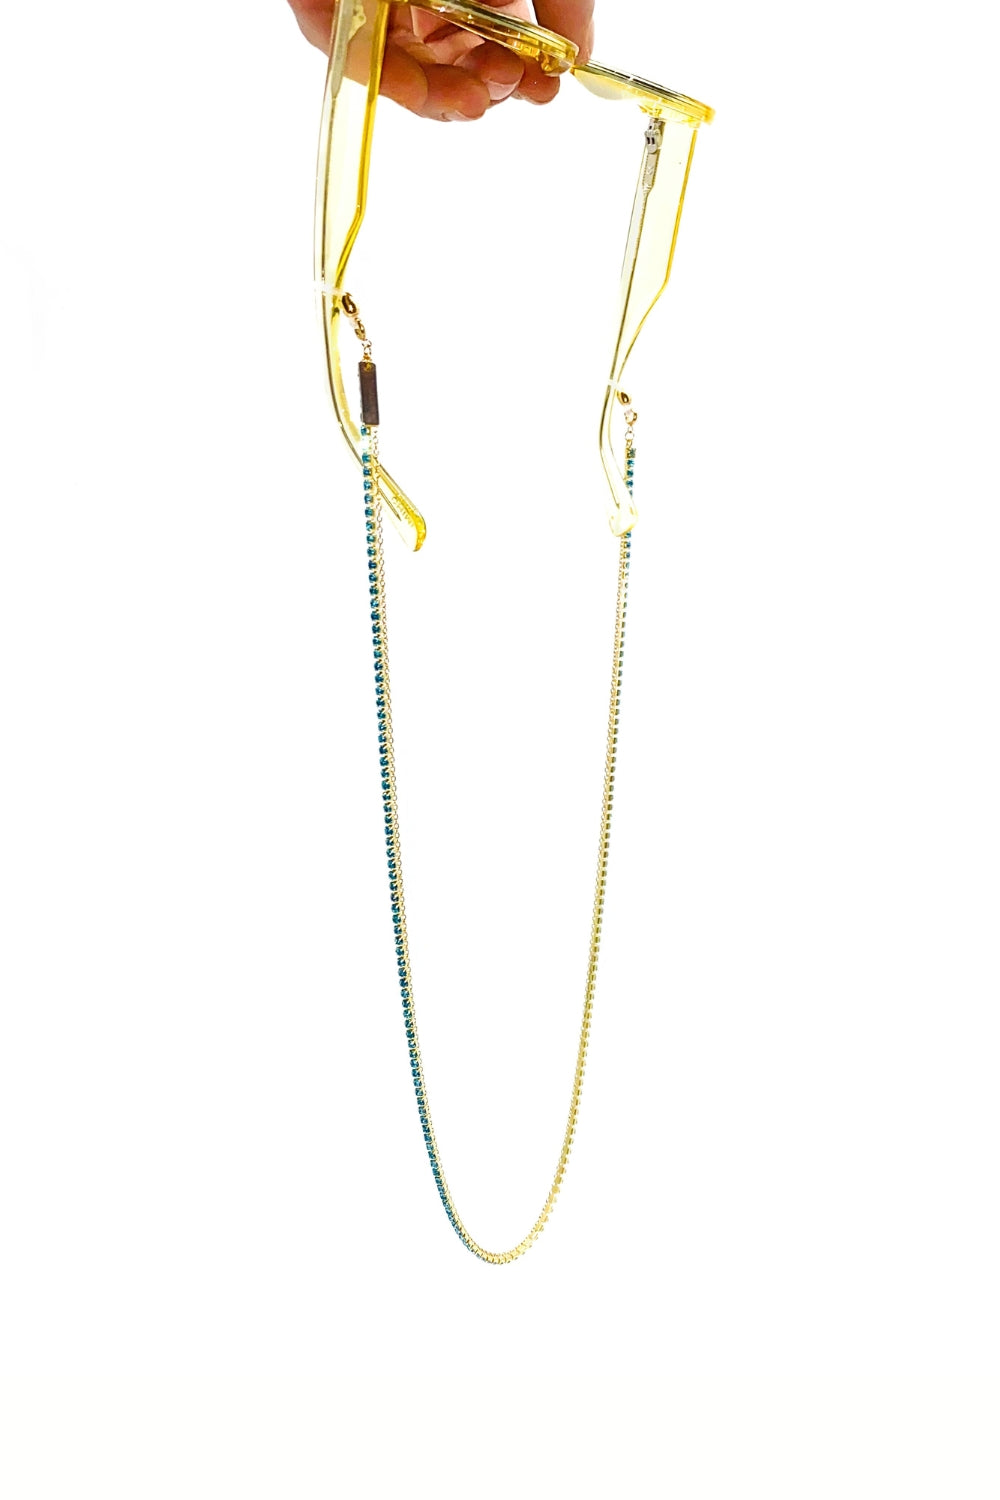 GLORIOUS GOLD - BLUE Crystals Eyewear Chain | SPECSET